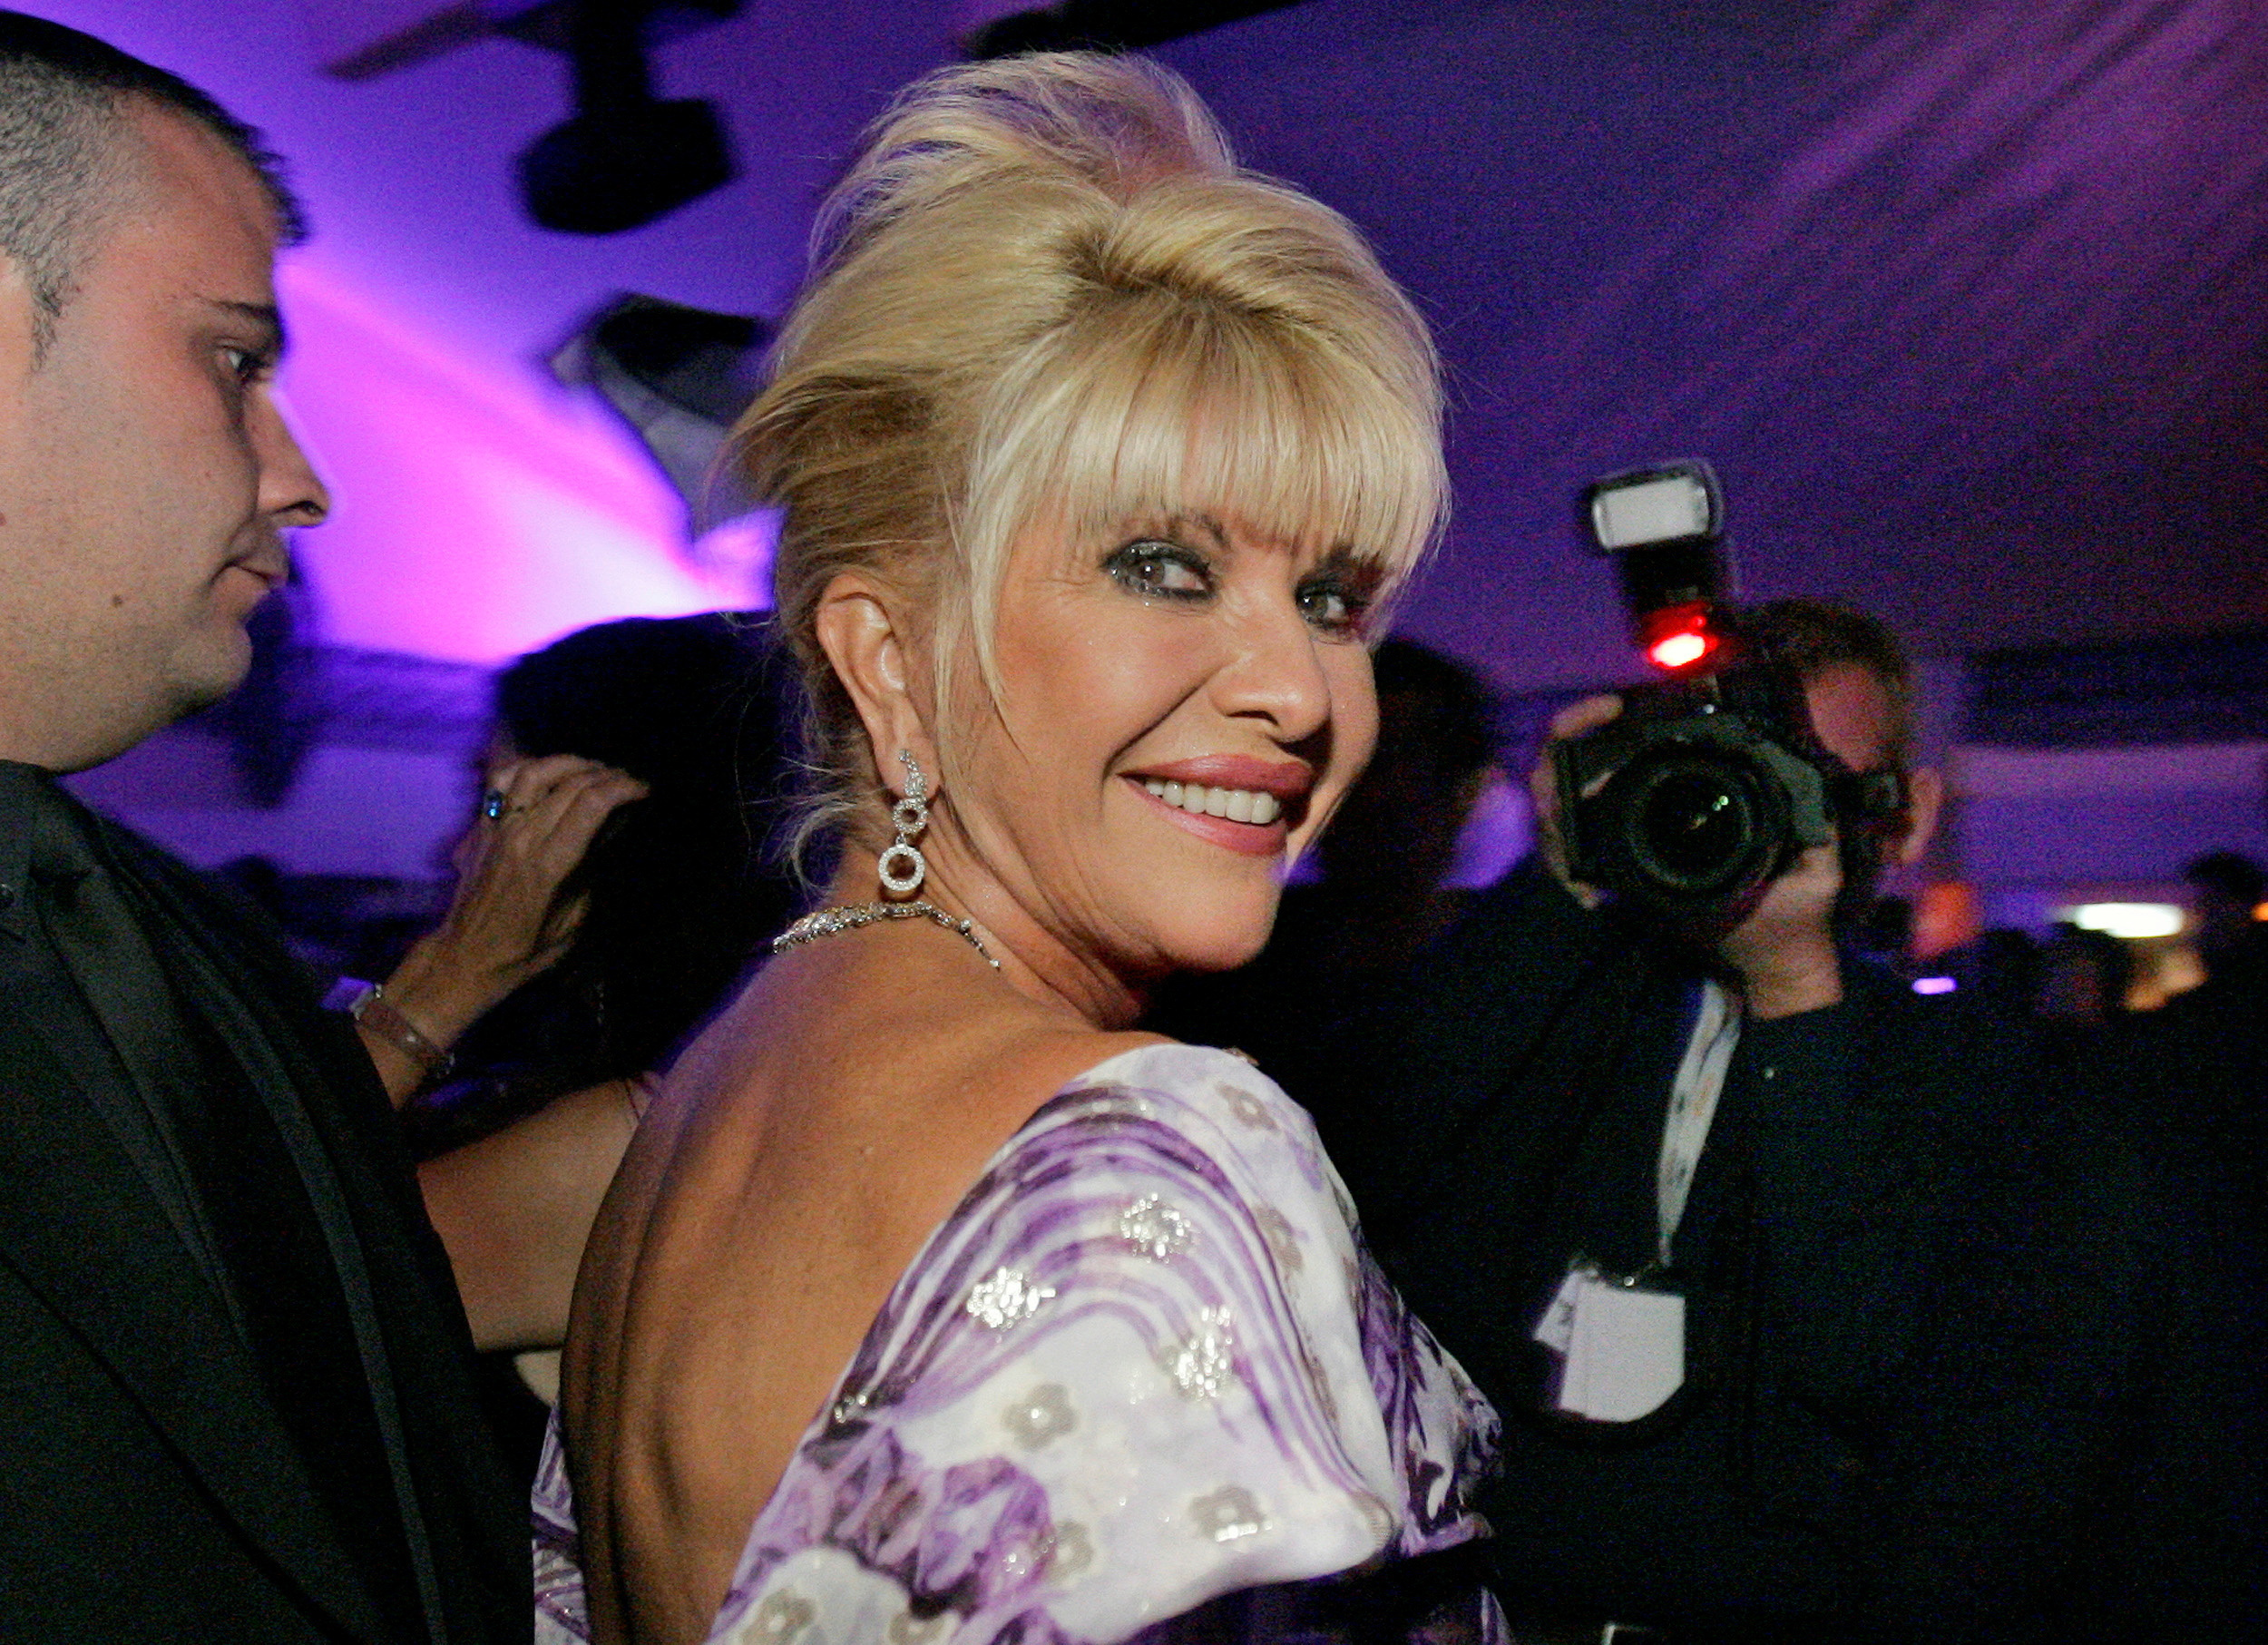 Medical Examiner Rules Ivana Trump’s Death an ‘Accident’ Due to ‘Blunt Impact Injuries’ from Falling Down Stairs of Her Manhattan Home